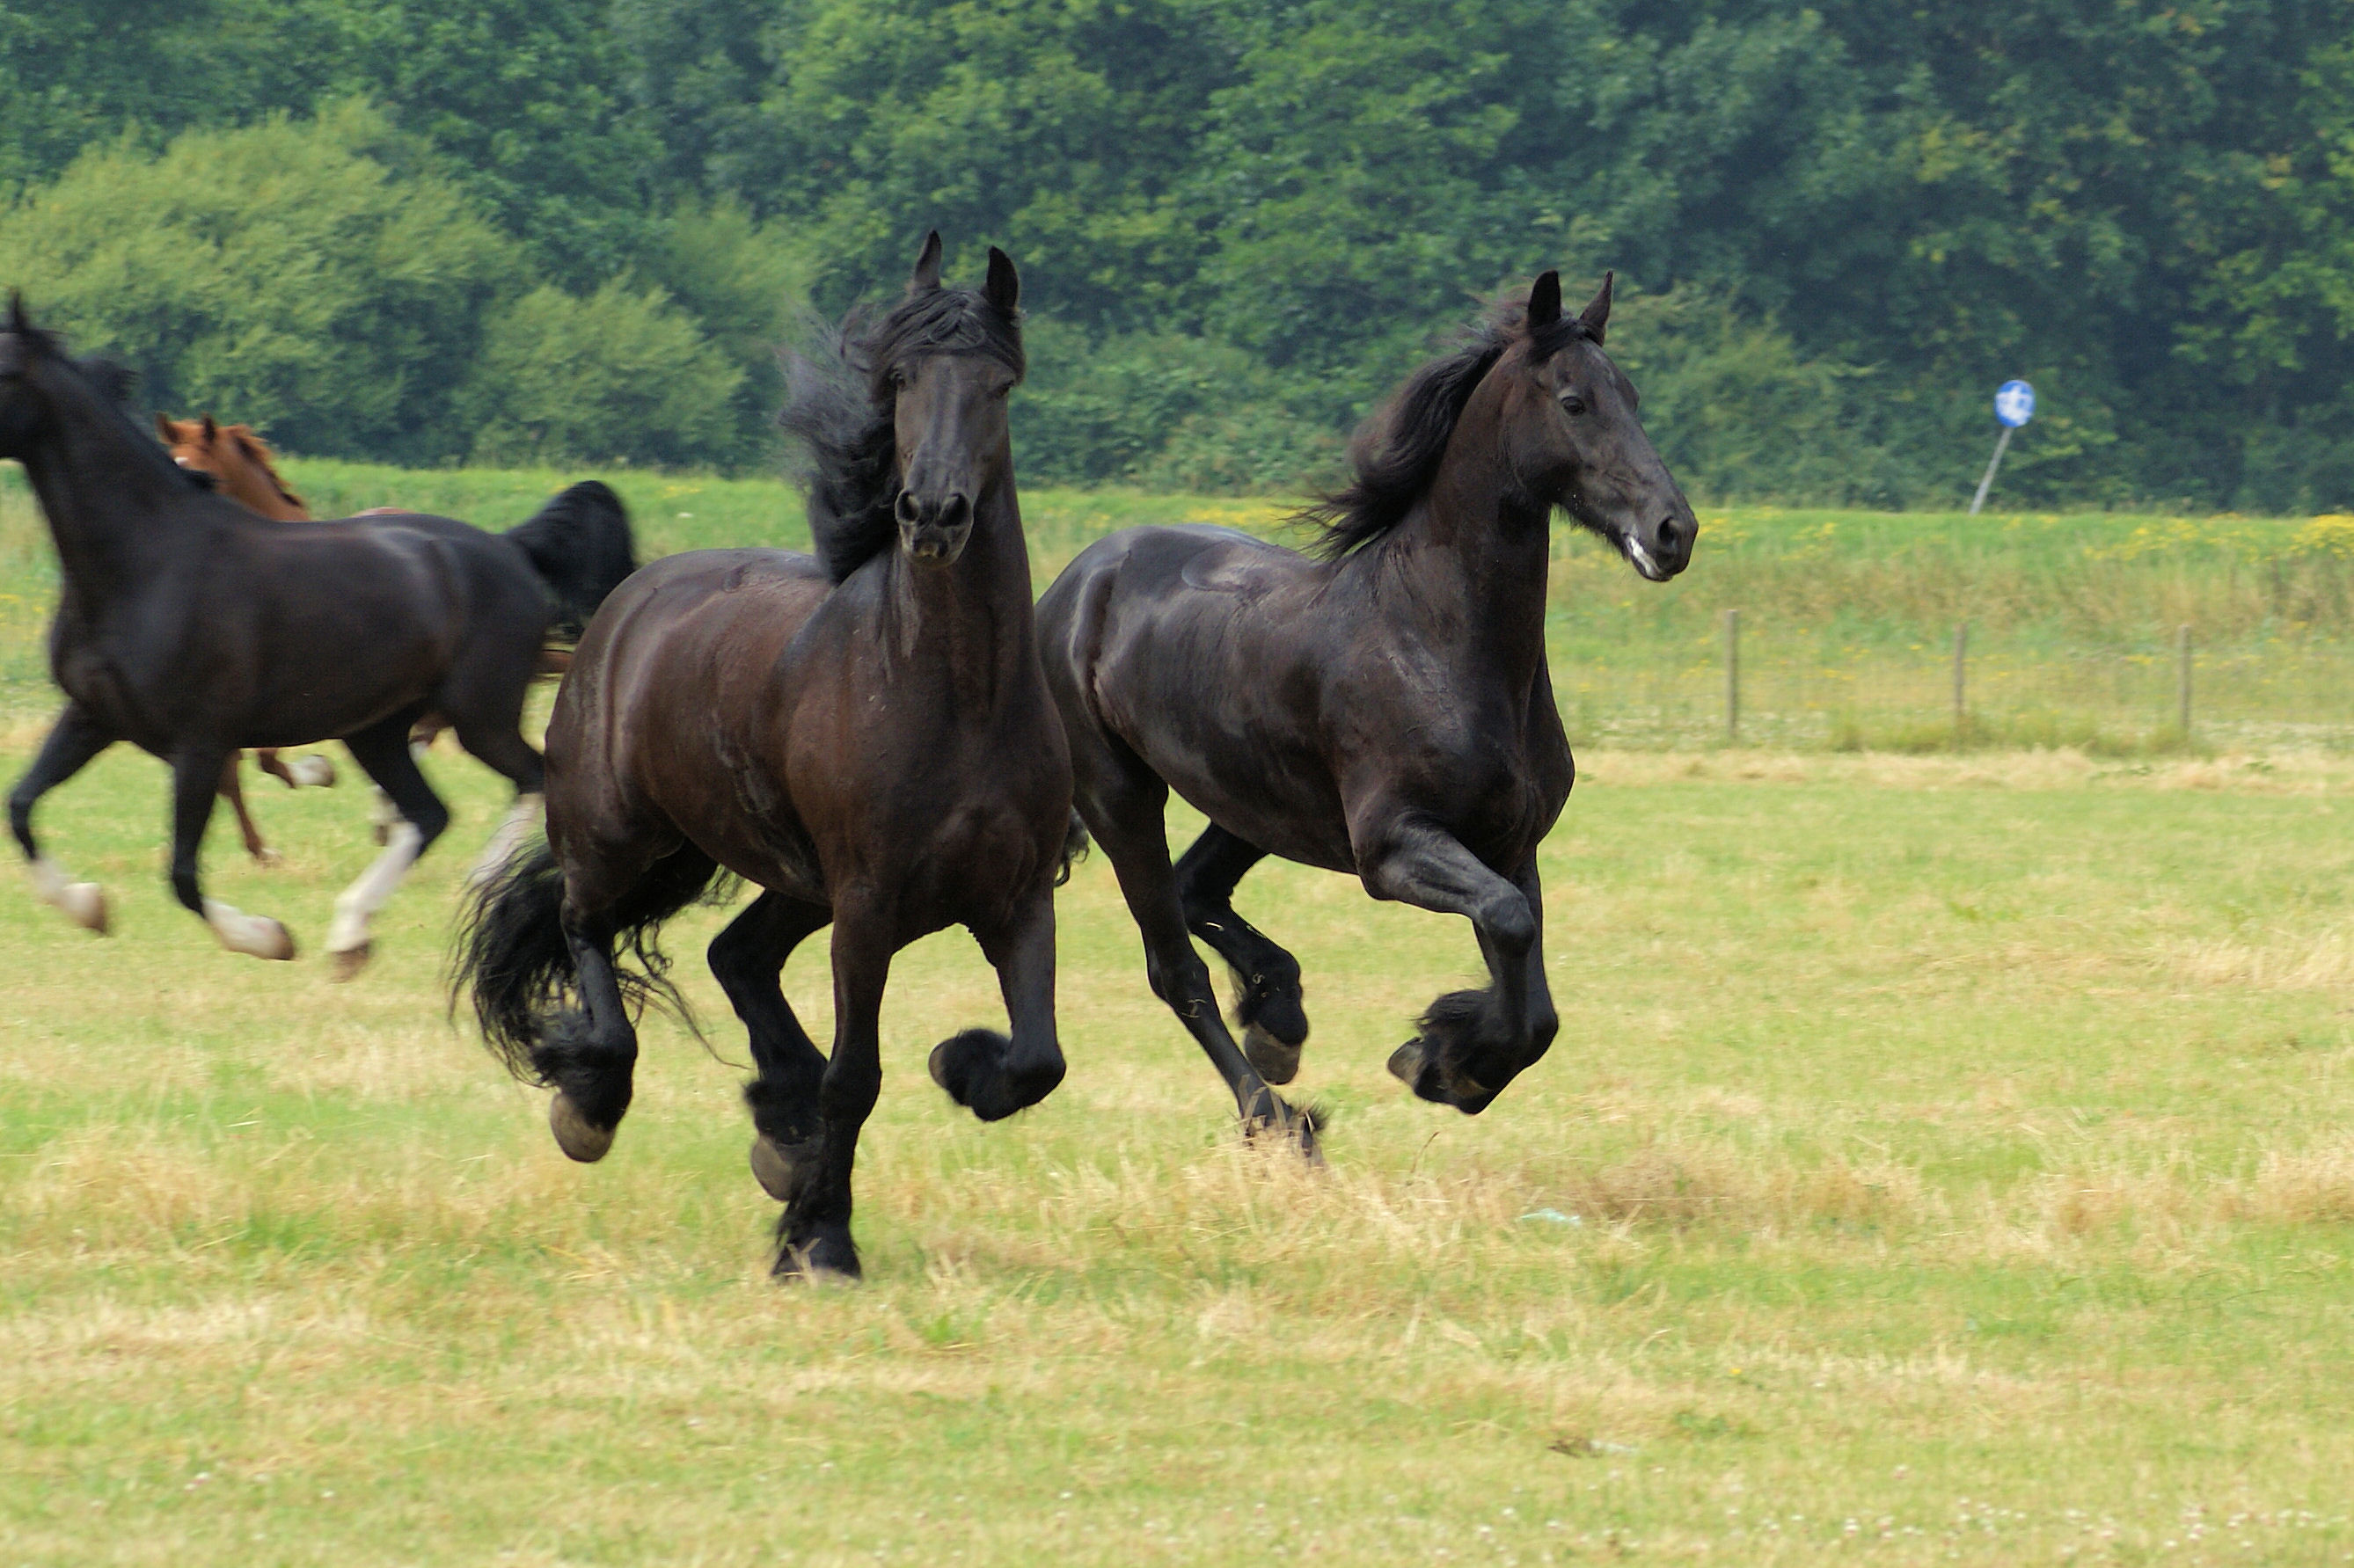 Horses in the netherlands photo